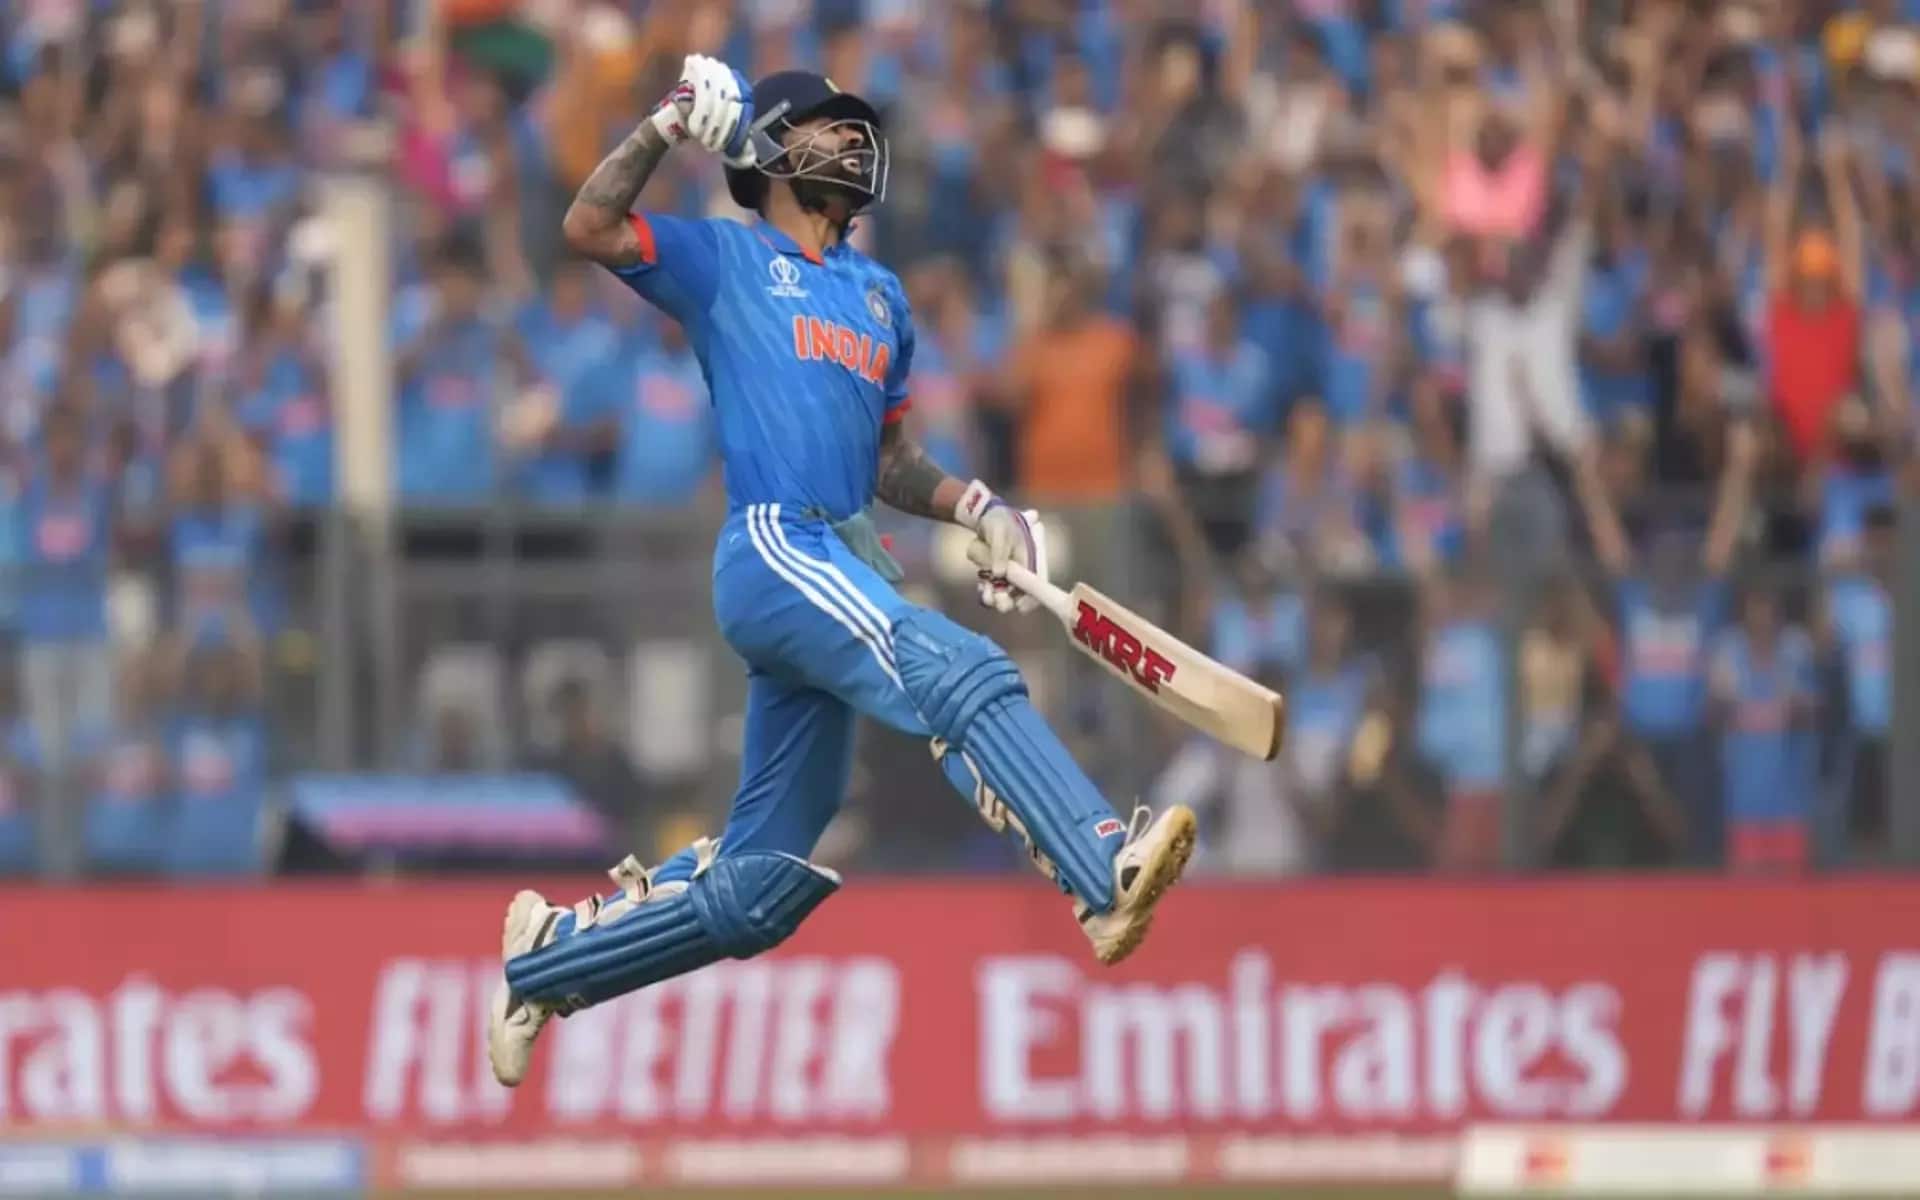 Kohli's 50th ODI hundred was scored in front of a jam-packed Wankhede crowd (x.com)